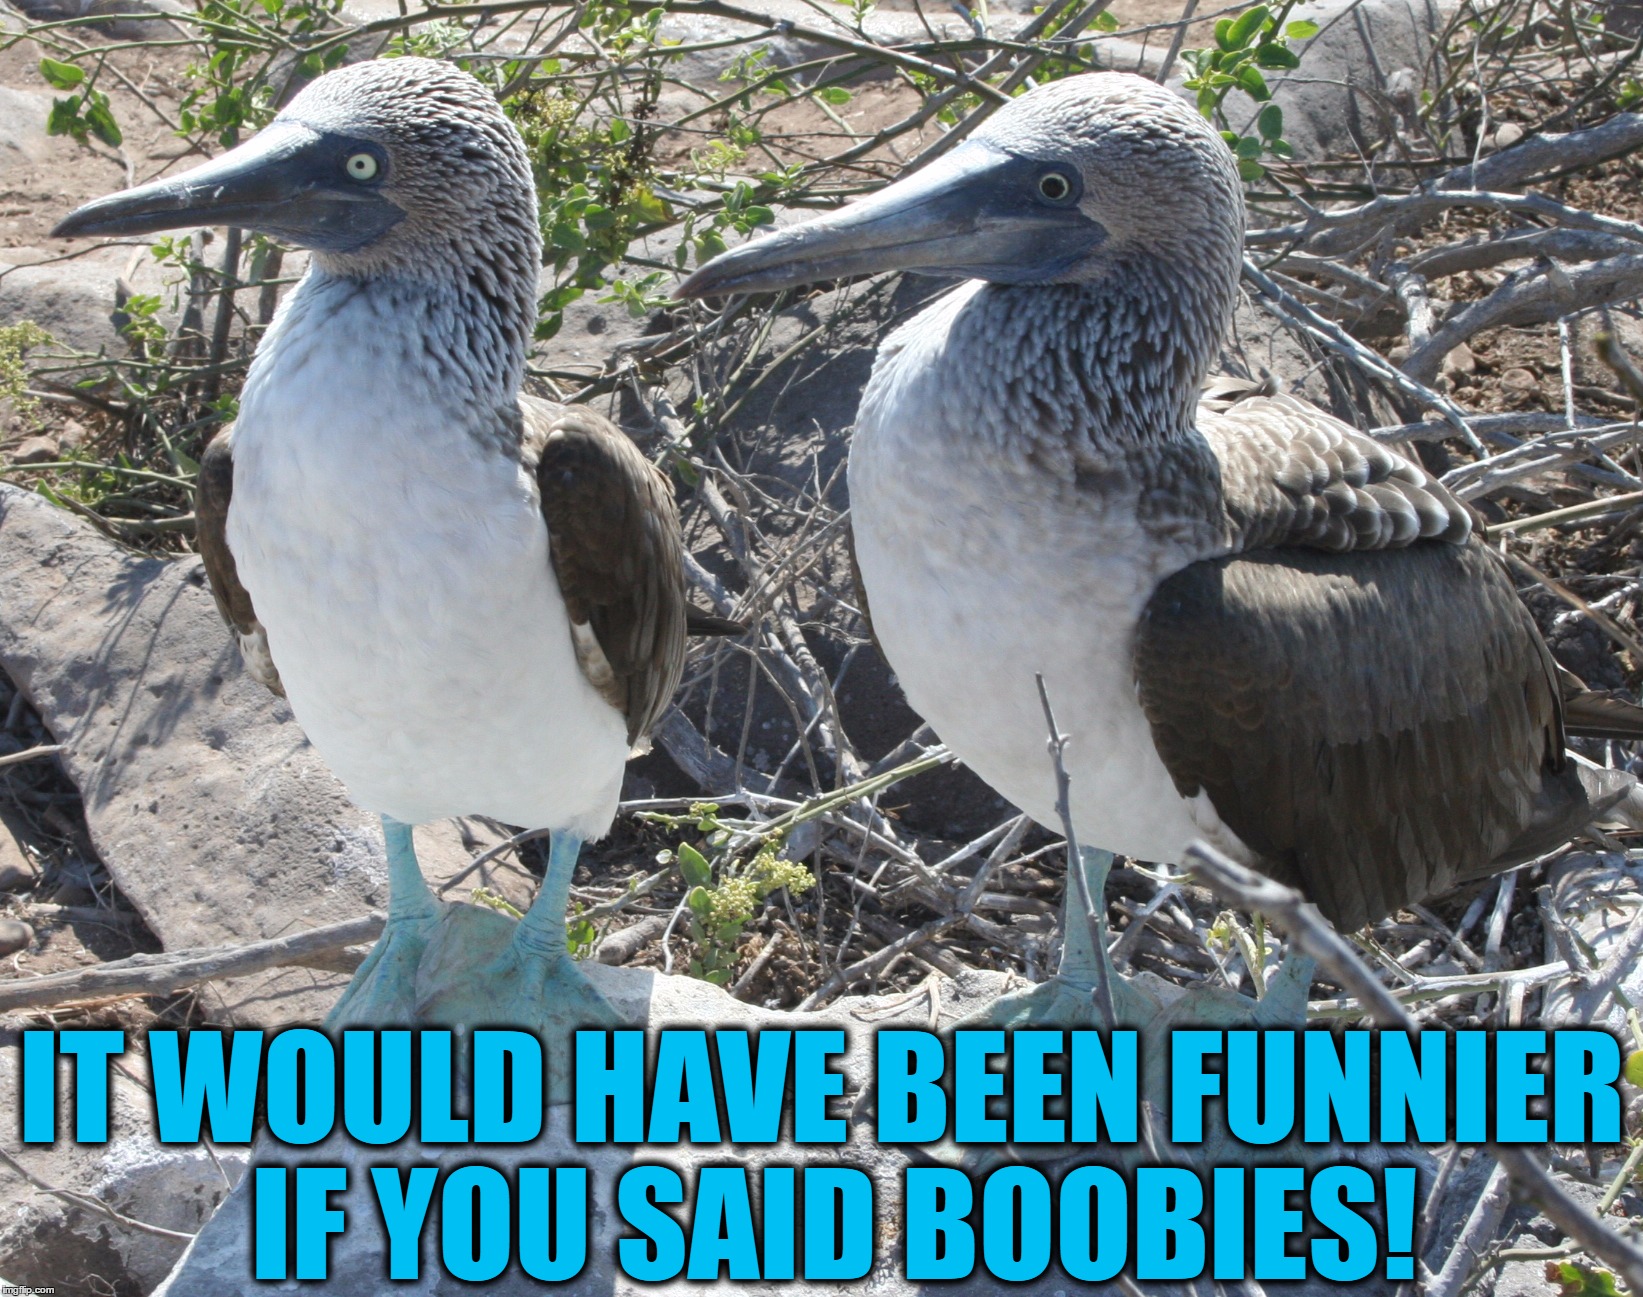 IT WOULD HAVE BEEN FUNNIER IF YOU SAID BOOBIES! | made w/ Imgflip meme maker